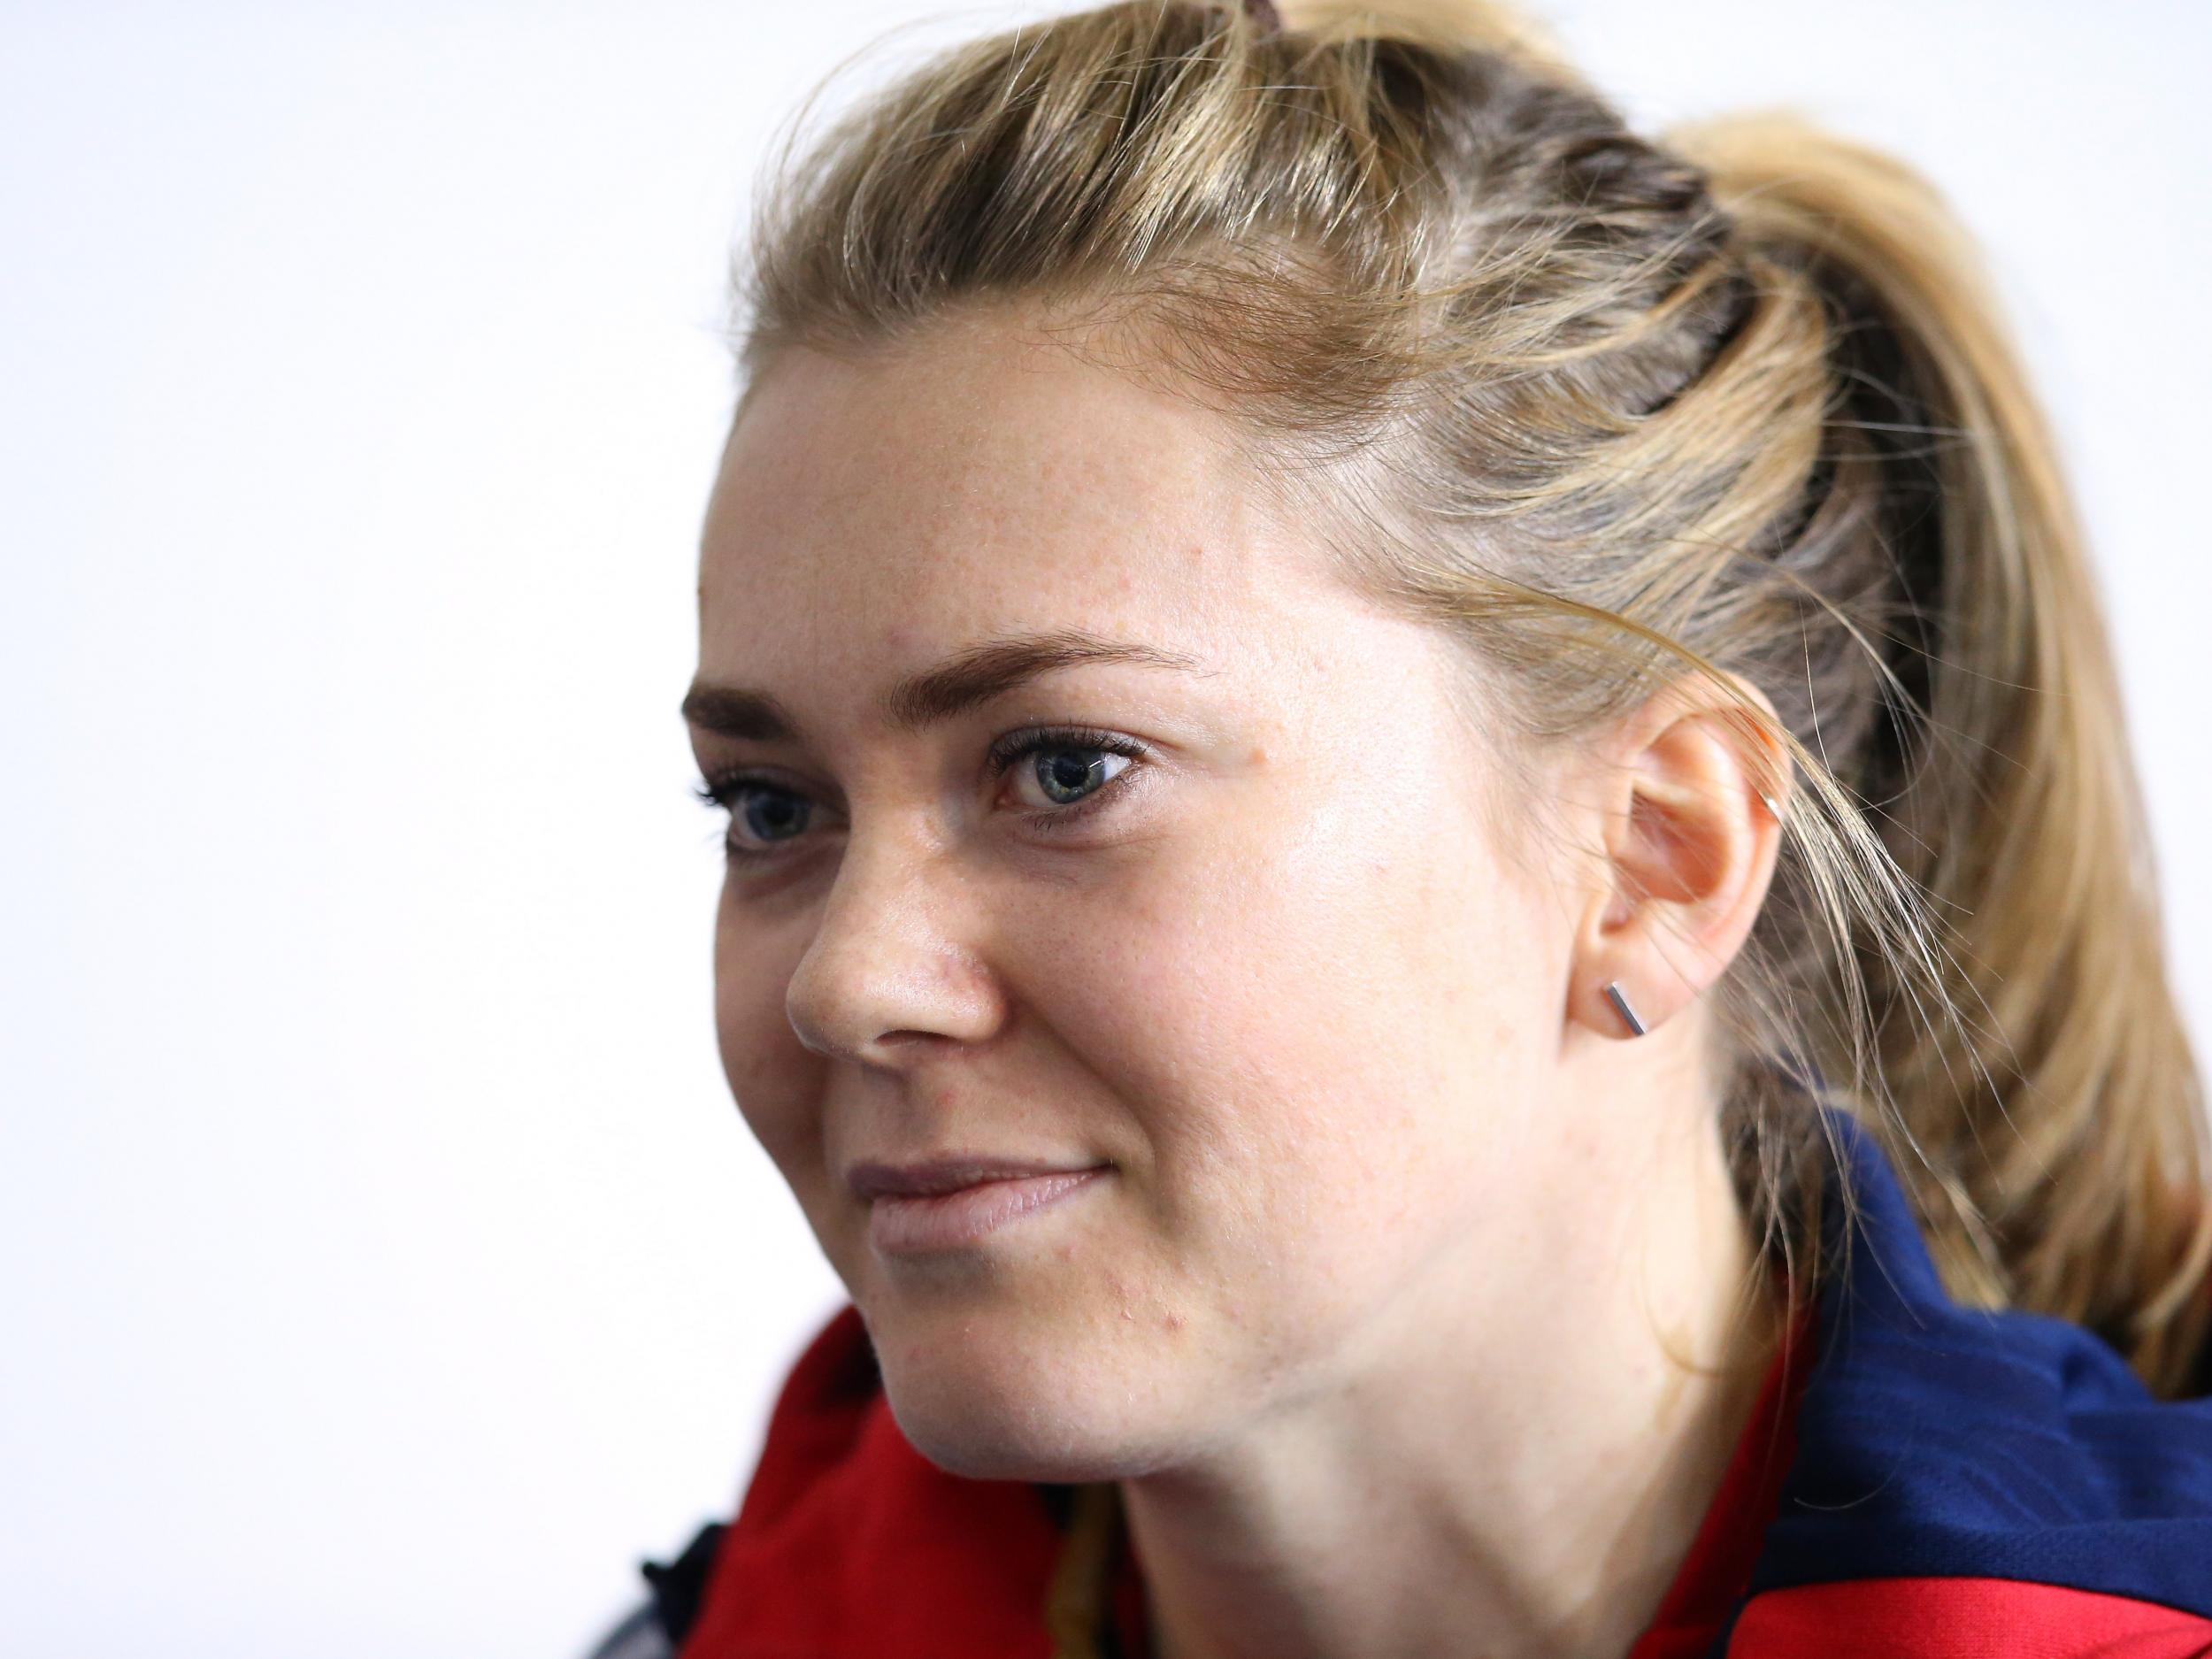 Varnish believes that she is the victim of a 'cover up' on the part of British Cycling